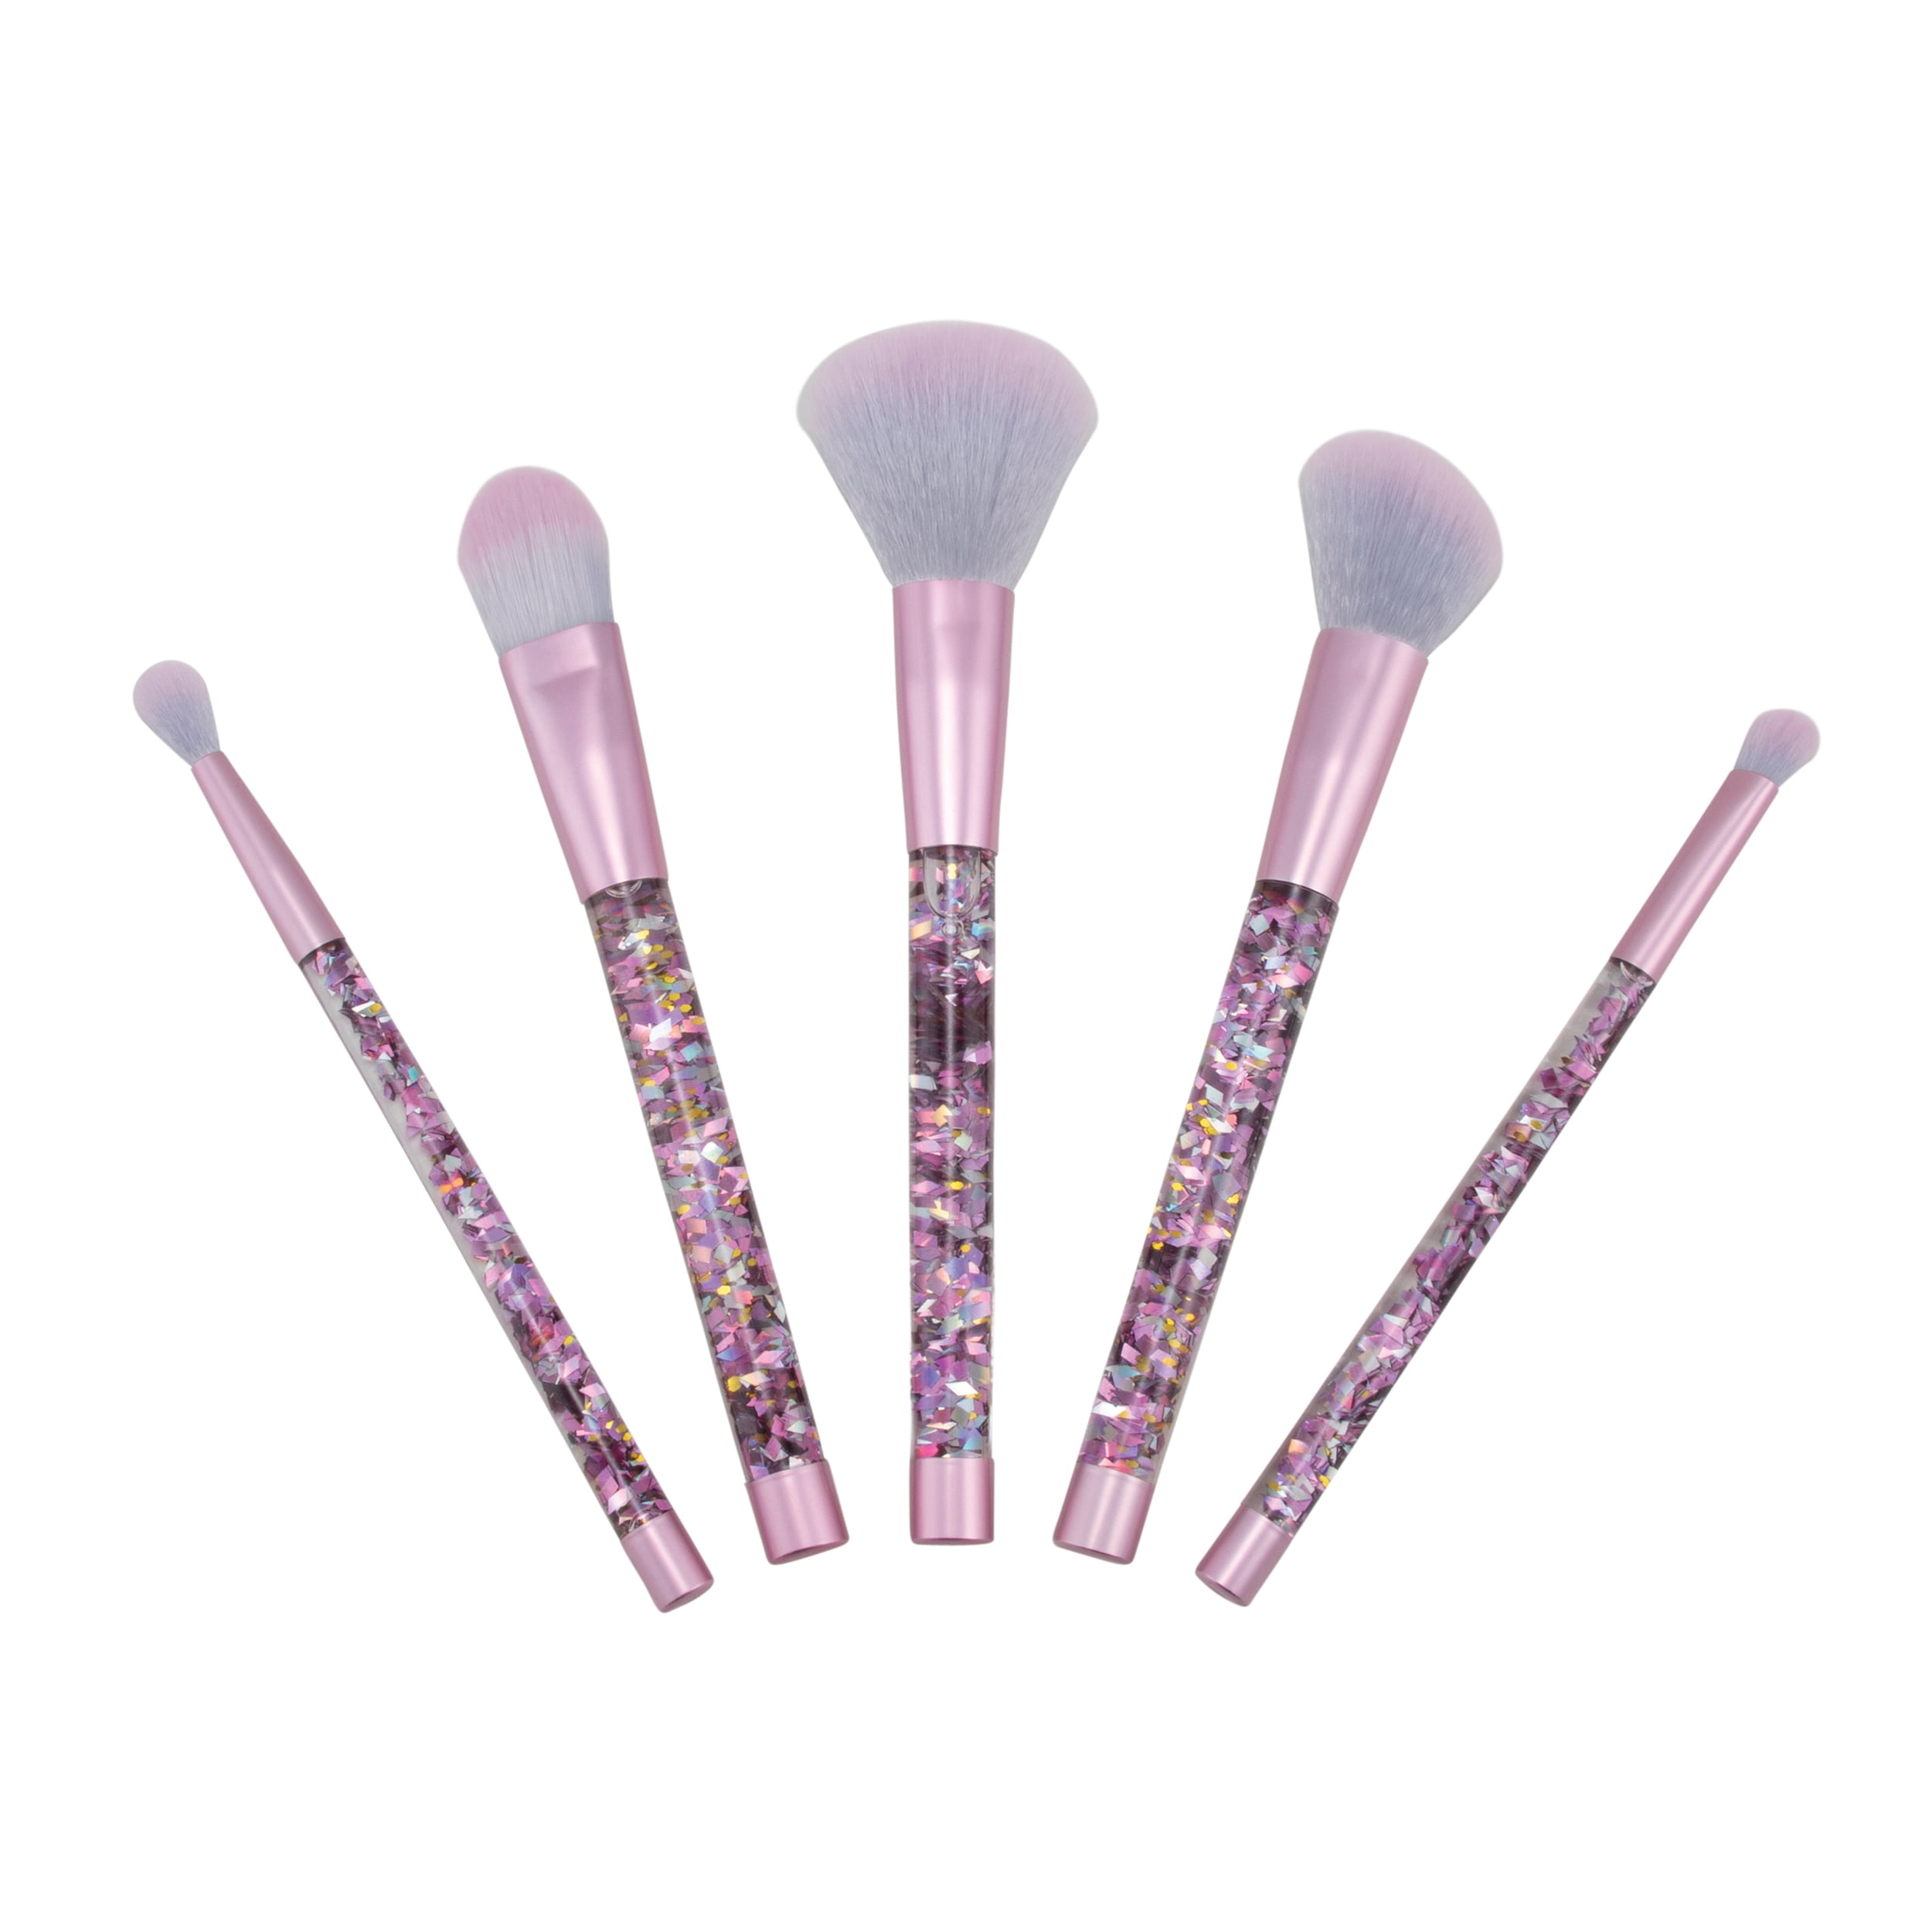 Candie Couture Brand 5 Piece Face Makeup Brush Set for Face and Eyes. Pink  Glitter Design. 